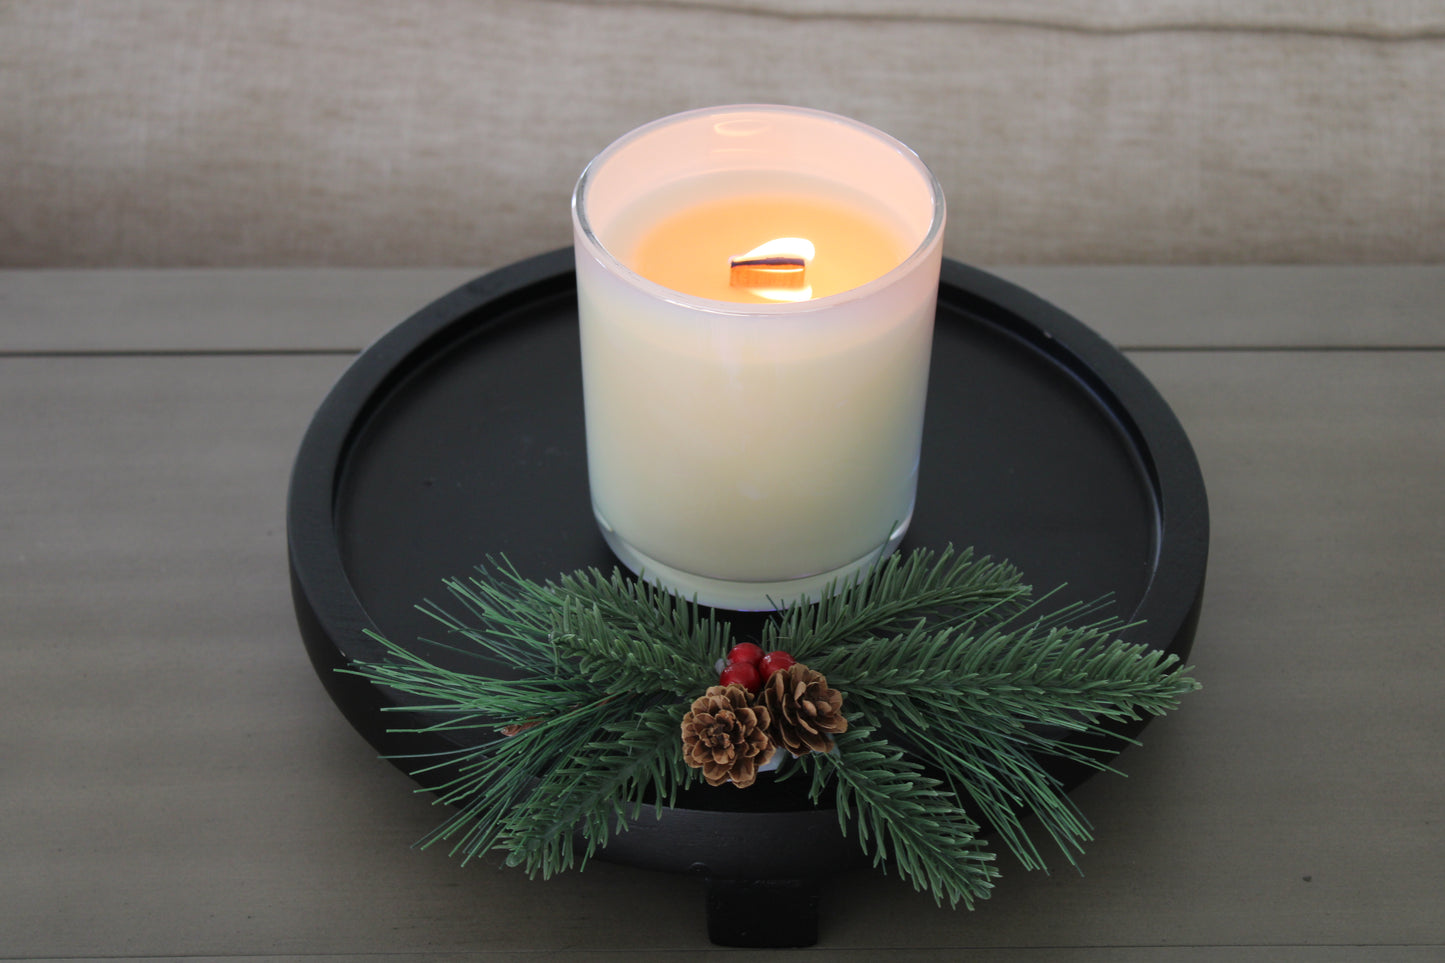 Christmas Tree Wooden Wick Candle (13 oz)